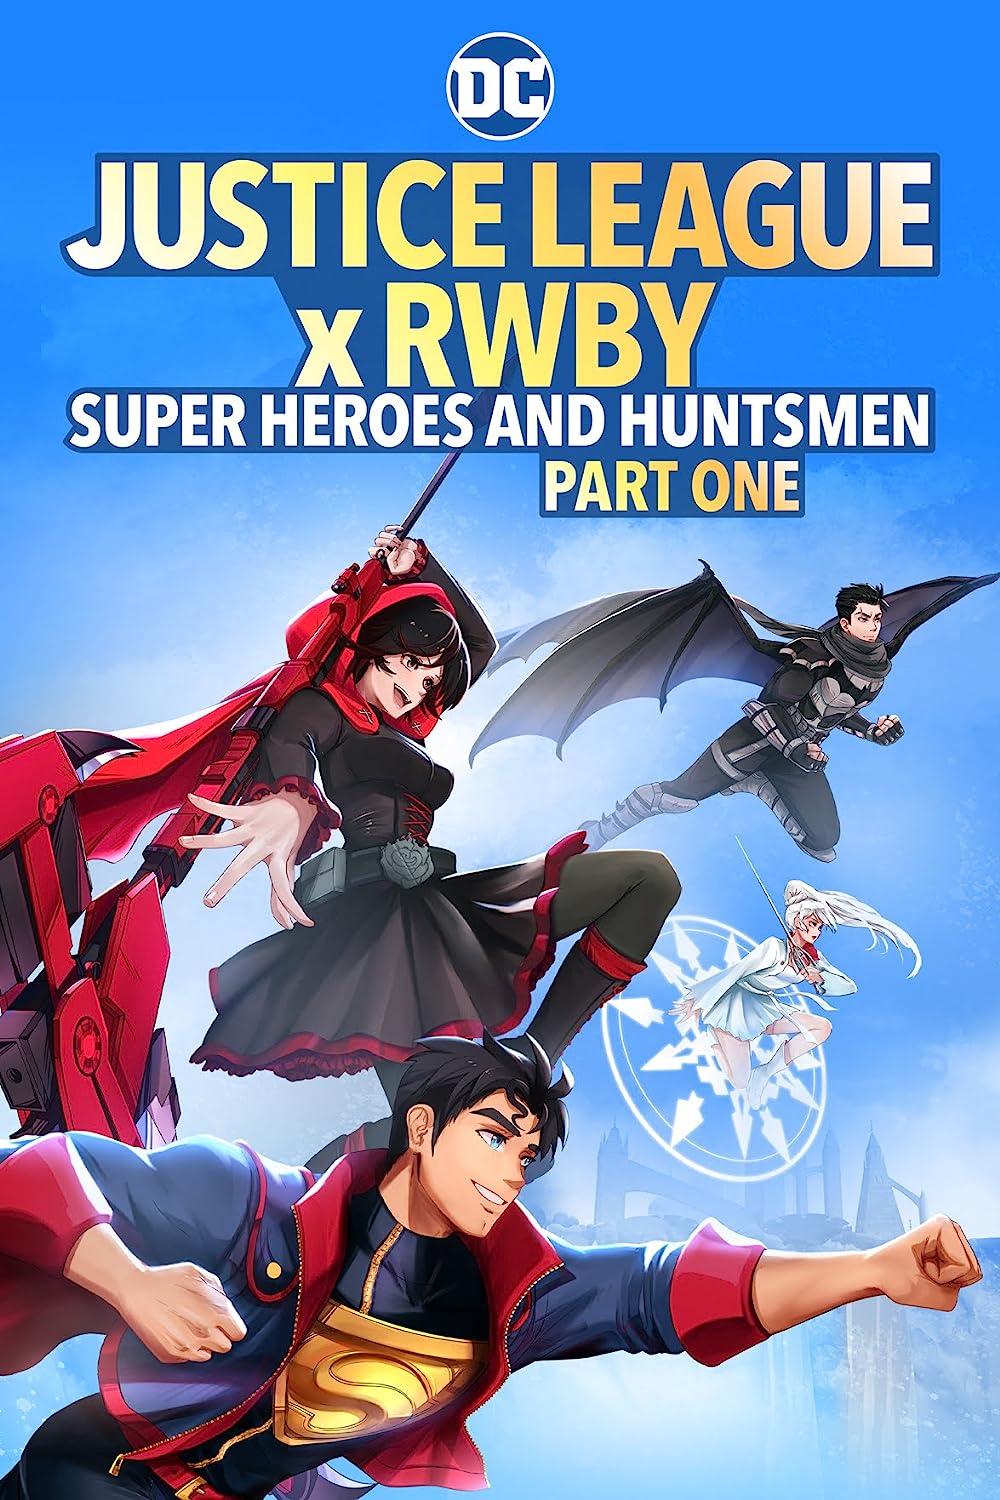 Banner Phim Justice League x RWBY: Super Heroes and Huntsmen Part One (Justice League x RWBY: Super Heroes and Huntsmen Part One)